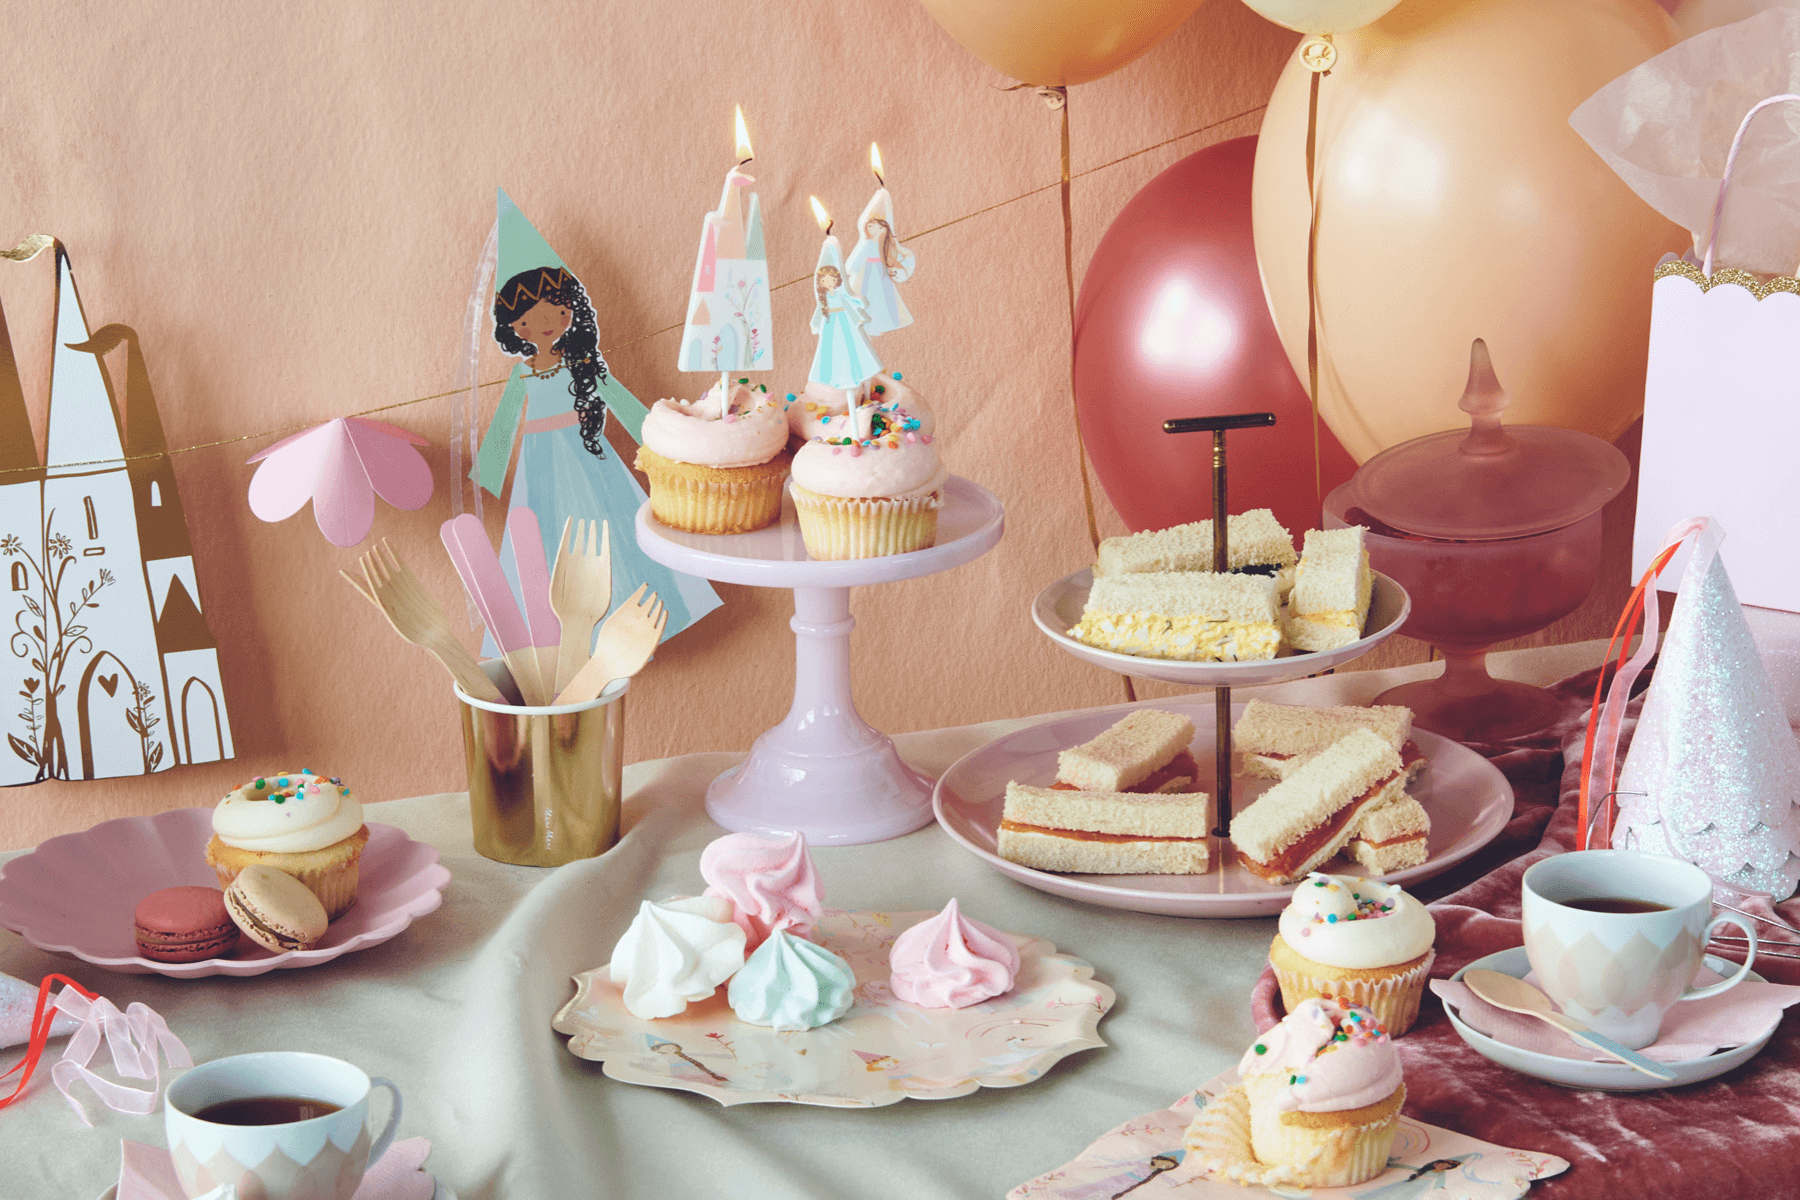 A table decorated for a princess themed birthday party, including cupcakes and tea cups.